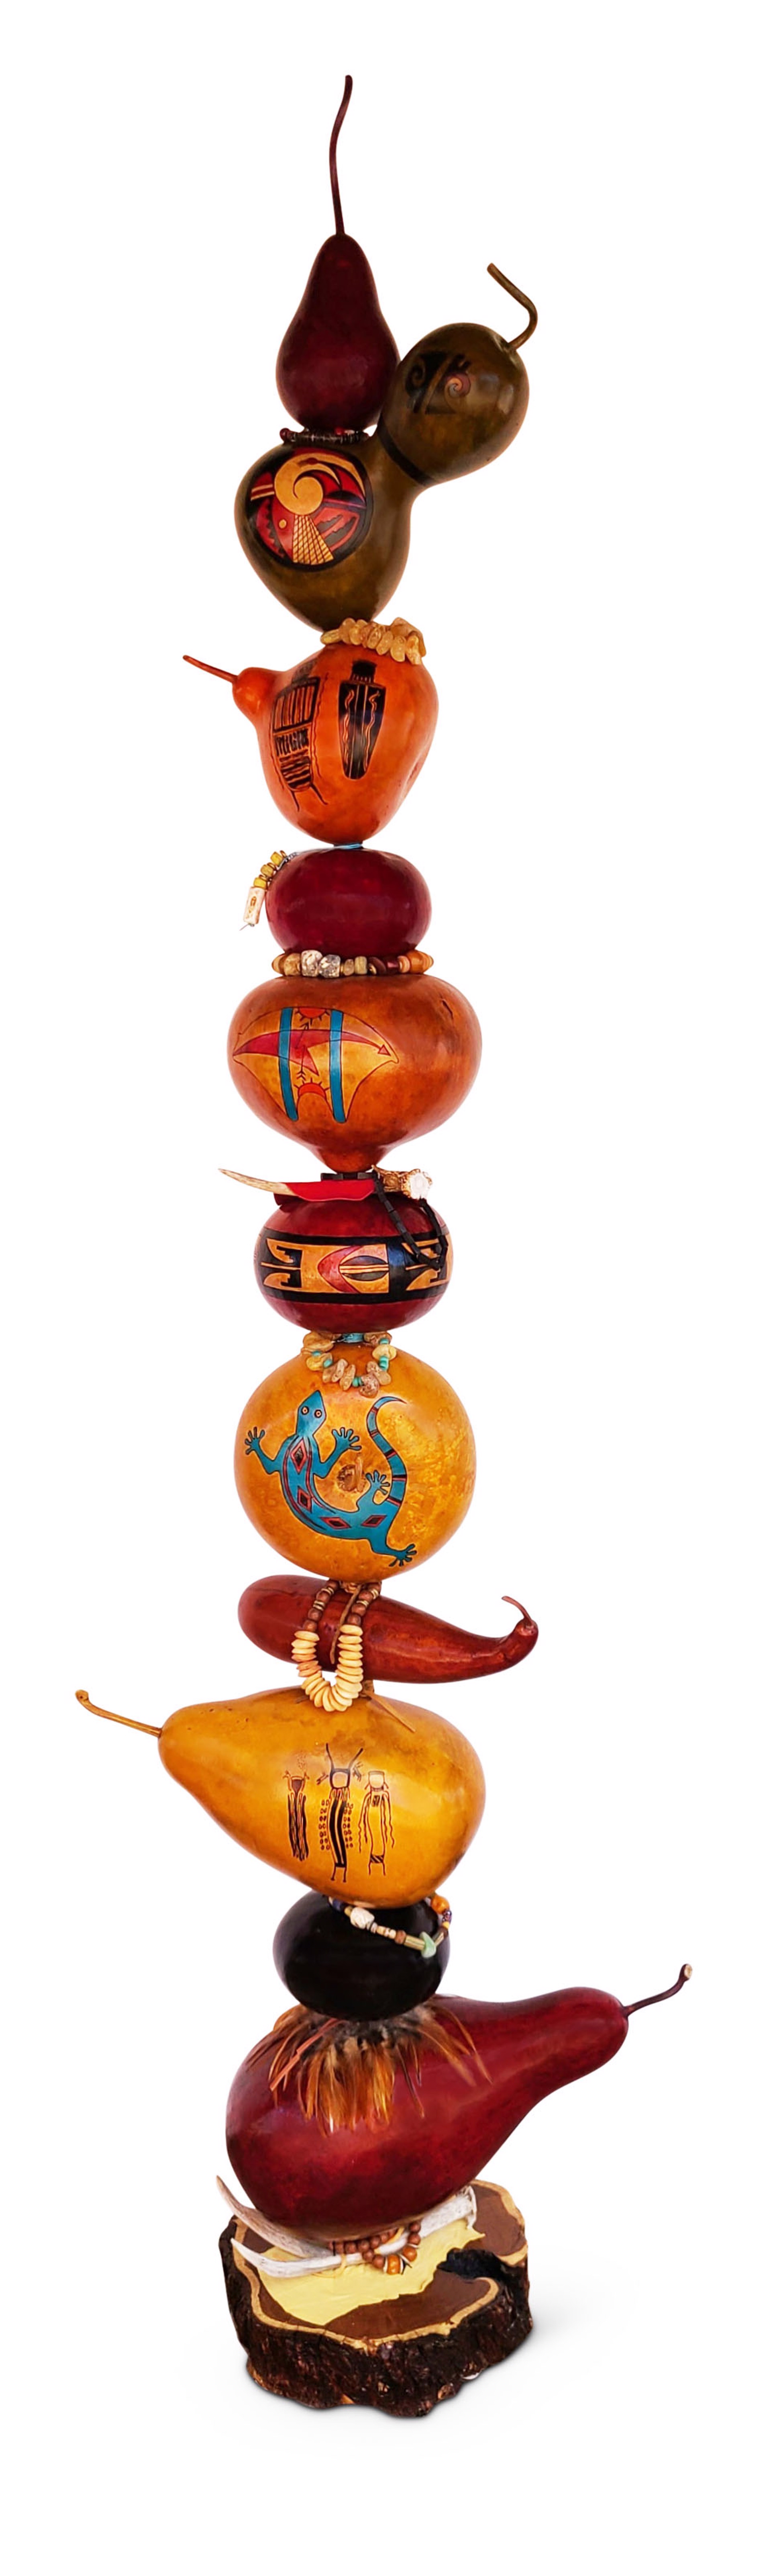 Gourd Totem Sculpture ~ Southwest Theme by Gary & Glenis Leitch